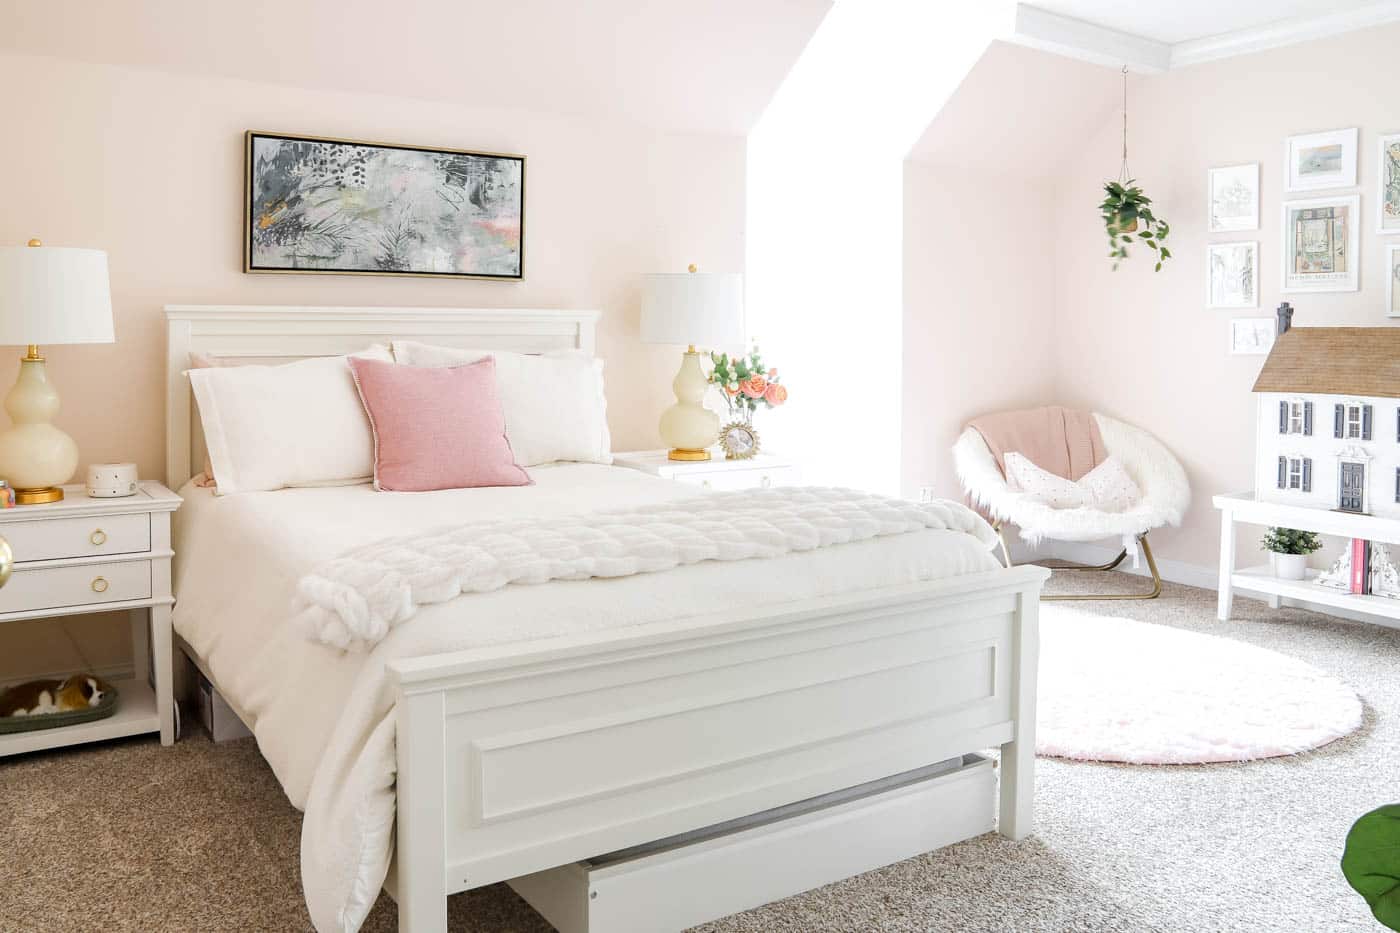 white full size bed with white nightstands and gold hardware in a teen girl bedroom.